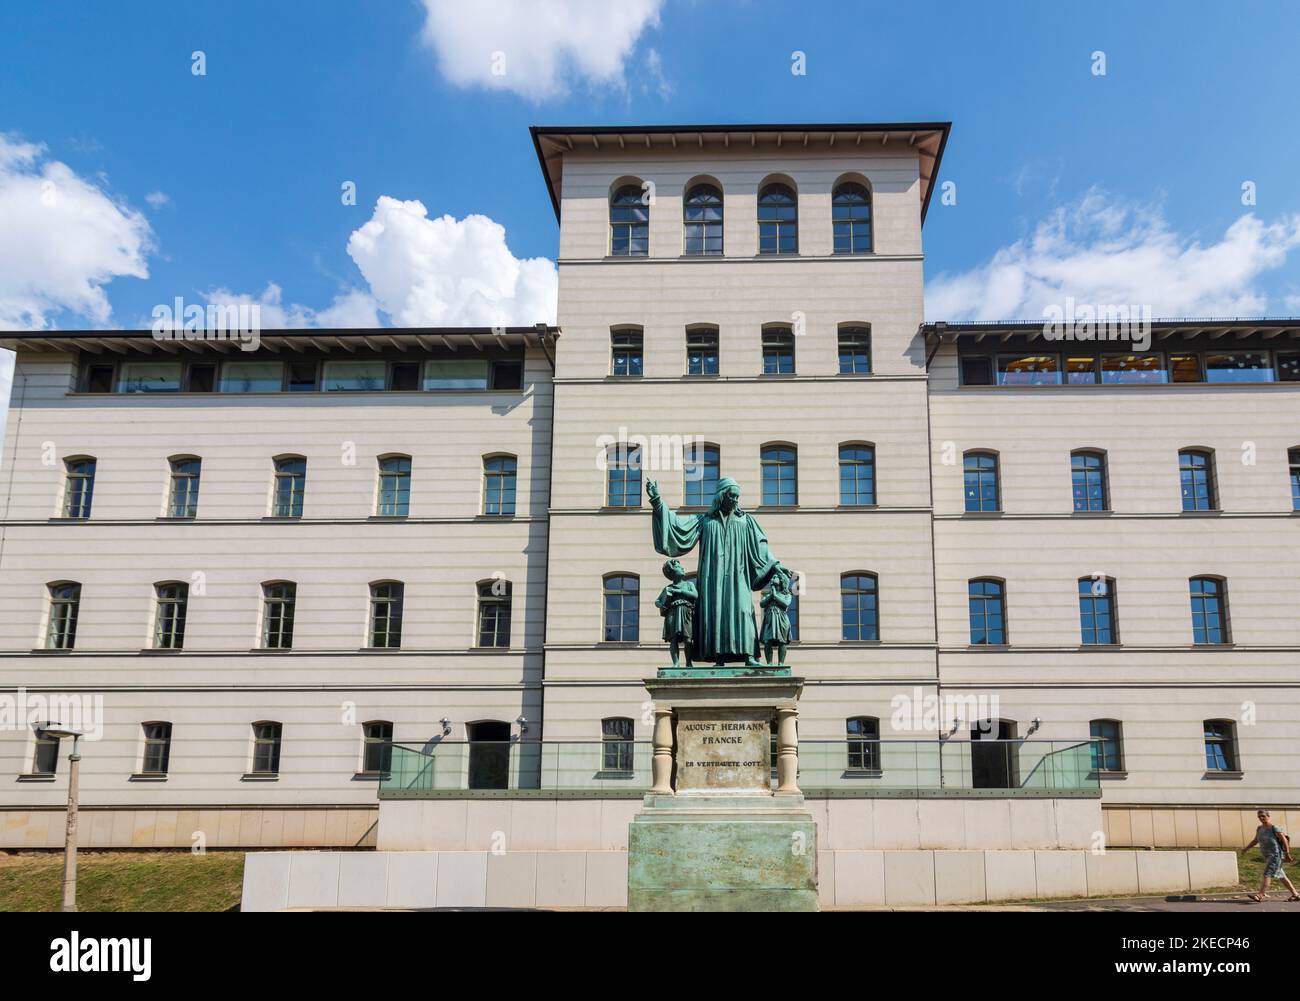 Halle (Saale), Francke monument in front of house 19 of Franckesche Stiftungen (Francke Foundations) in Saxony-Anhalt, Germany Stock Photo